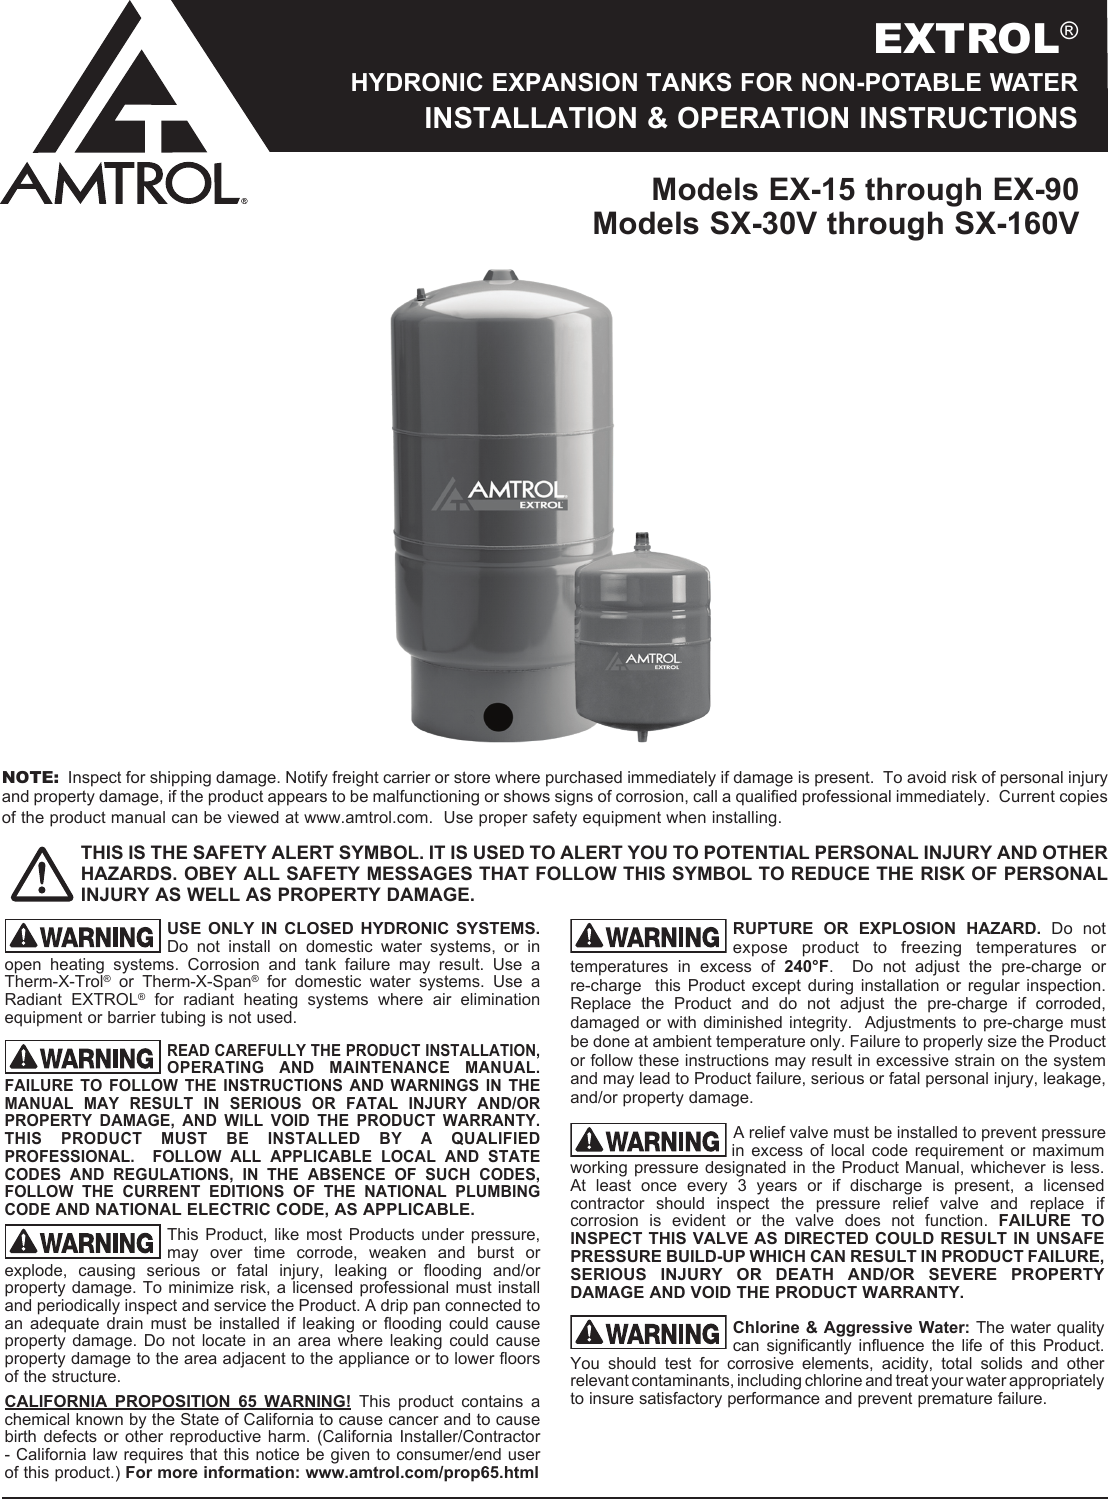 Page 1 of 2 - 551506 2 Amtrol Extrol SX-40V Expansion Tank Installation Instructions